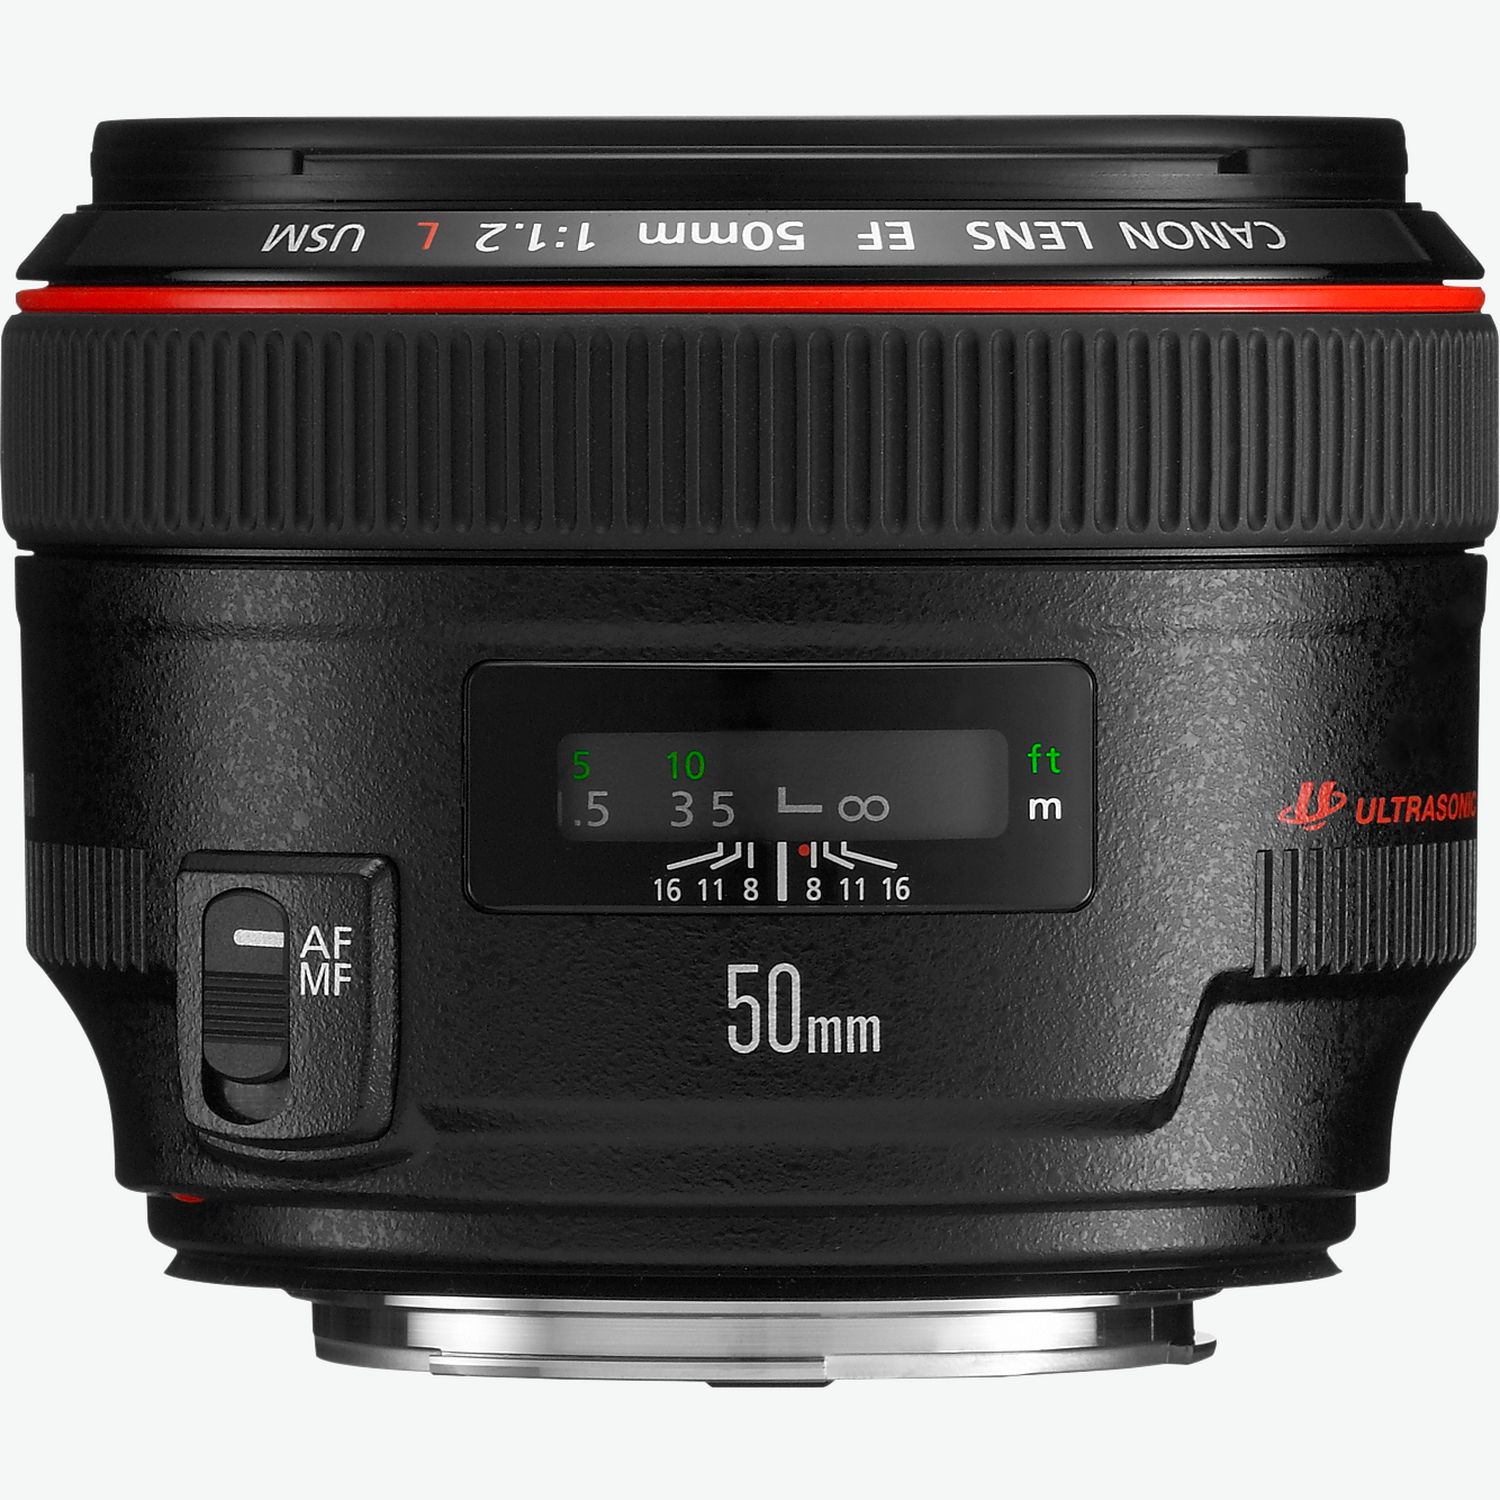 Buy Canon EF 50mm f/1.8 STM Lens — Canon Norge Store